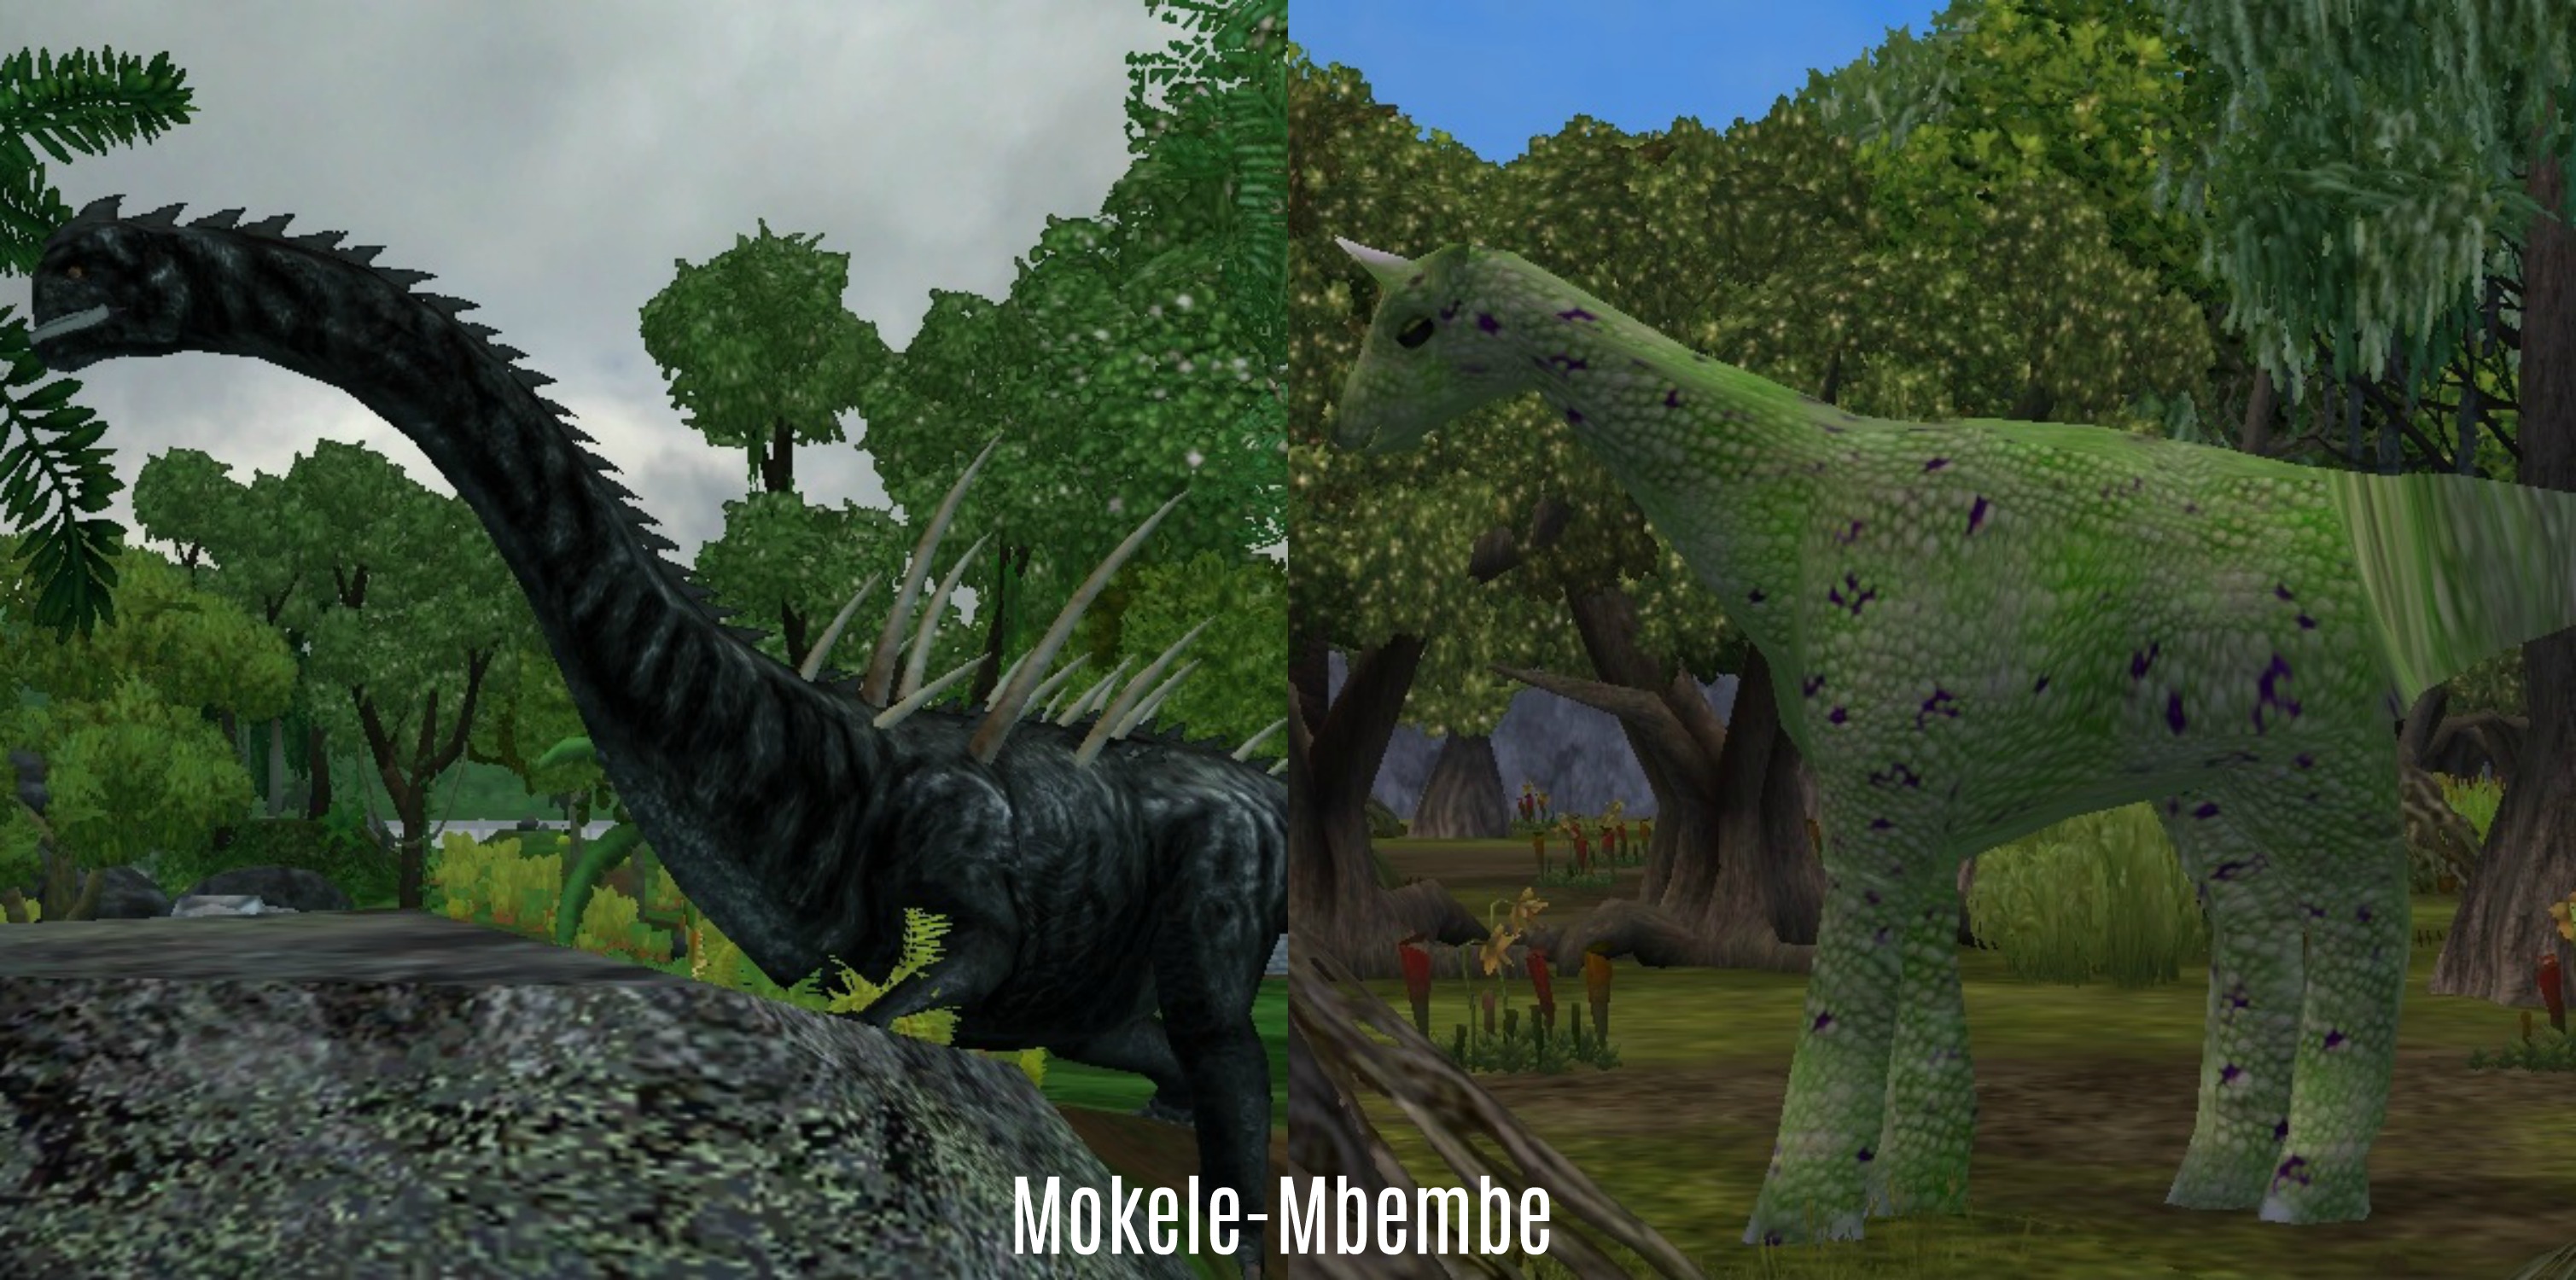 The Real Mokele Mbembe by Allorock2 on DeviantArt